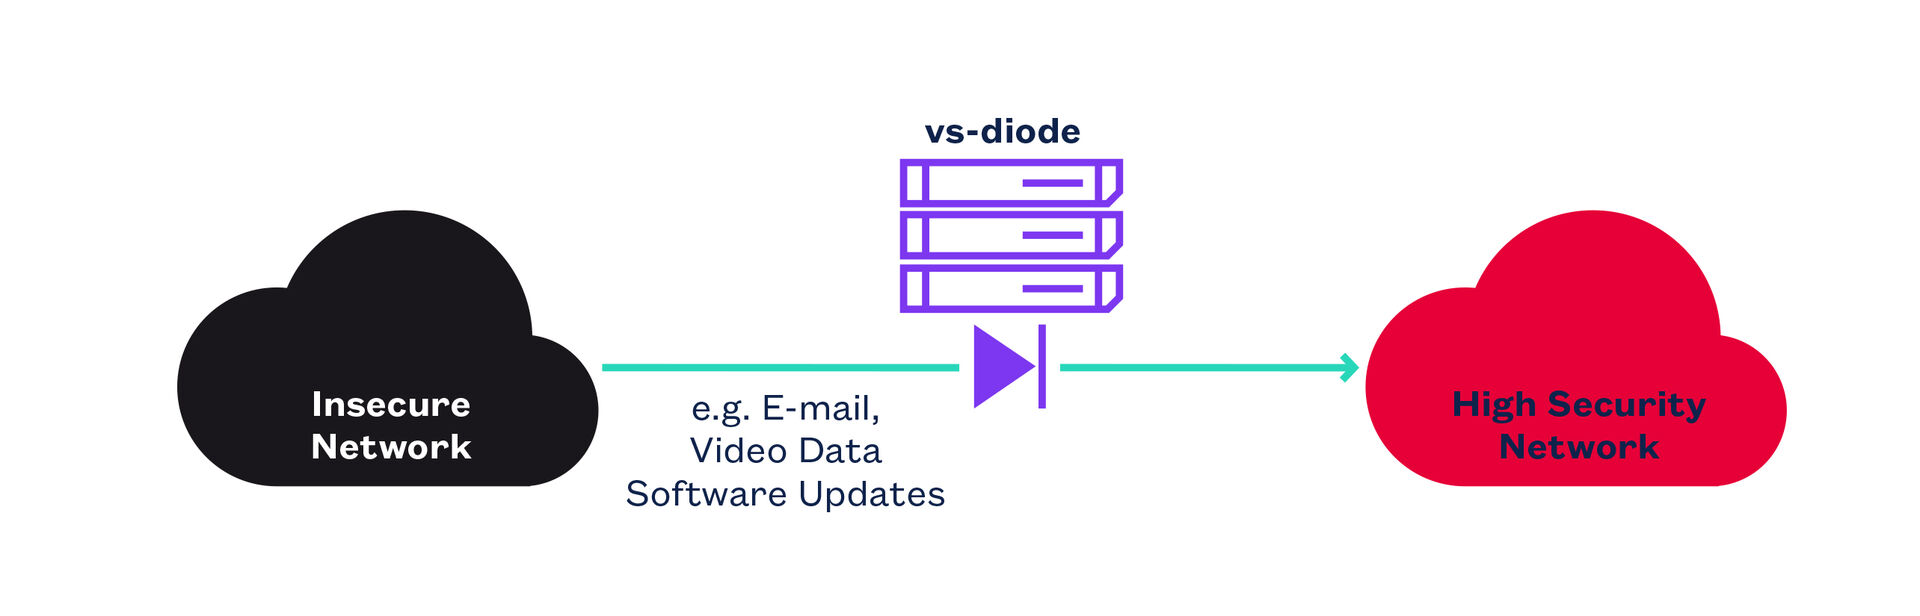 vs-diode classified network